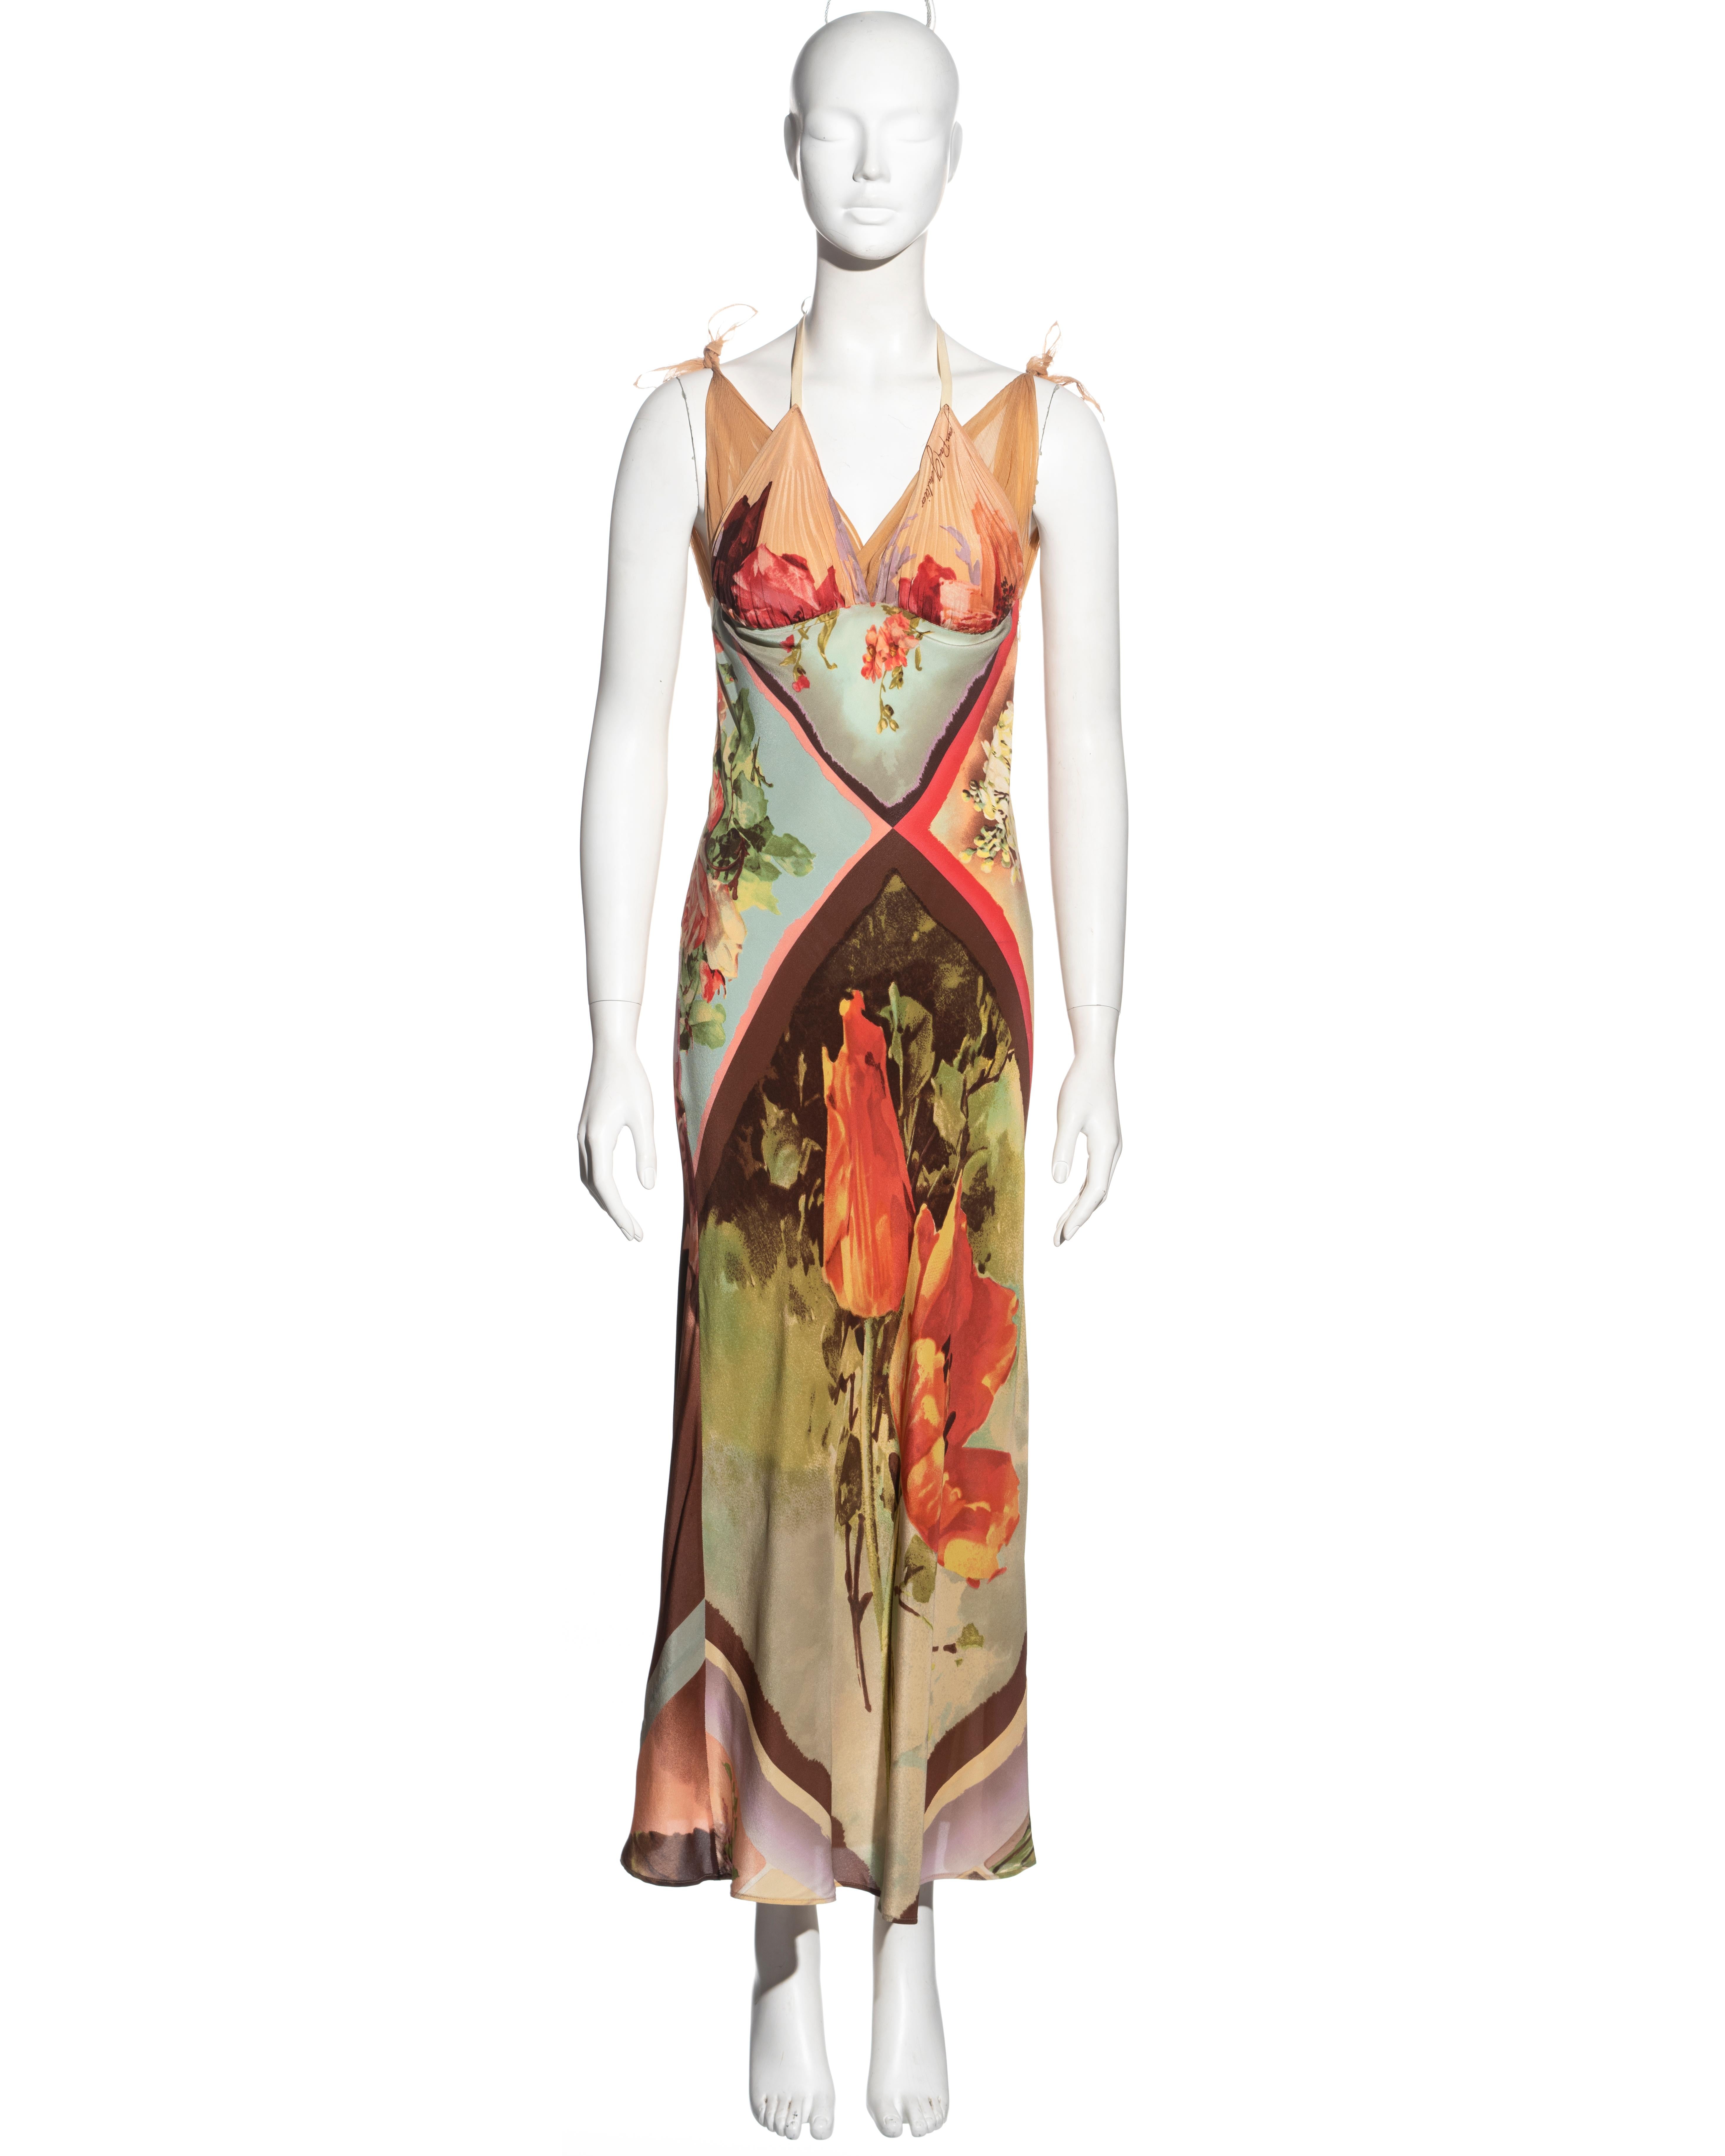 ▪ Jean Paul Gaultier halterneck silk dress
▪ Enlarged multicoloured floral print 
▪ Accordion pleated bust with halterneck ties 
▪ Nude accordion pleated silk chiffon shoulder straps fasten into knots on the shoulders 
▪ Concealed zipper on the side